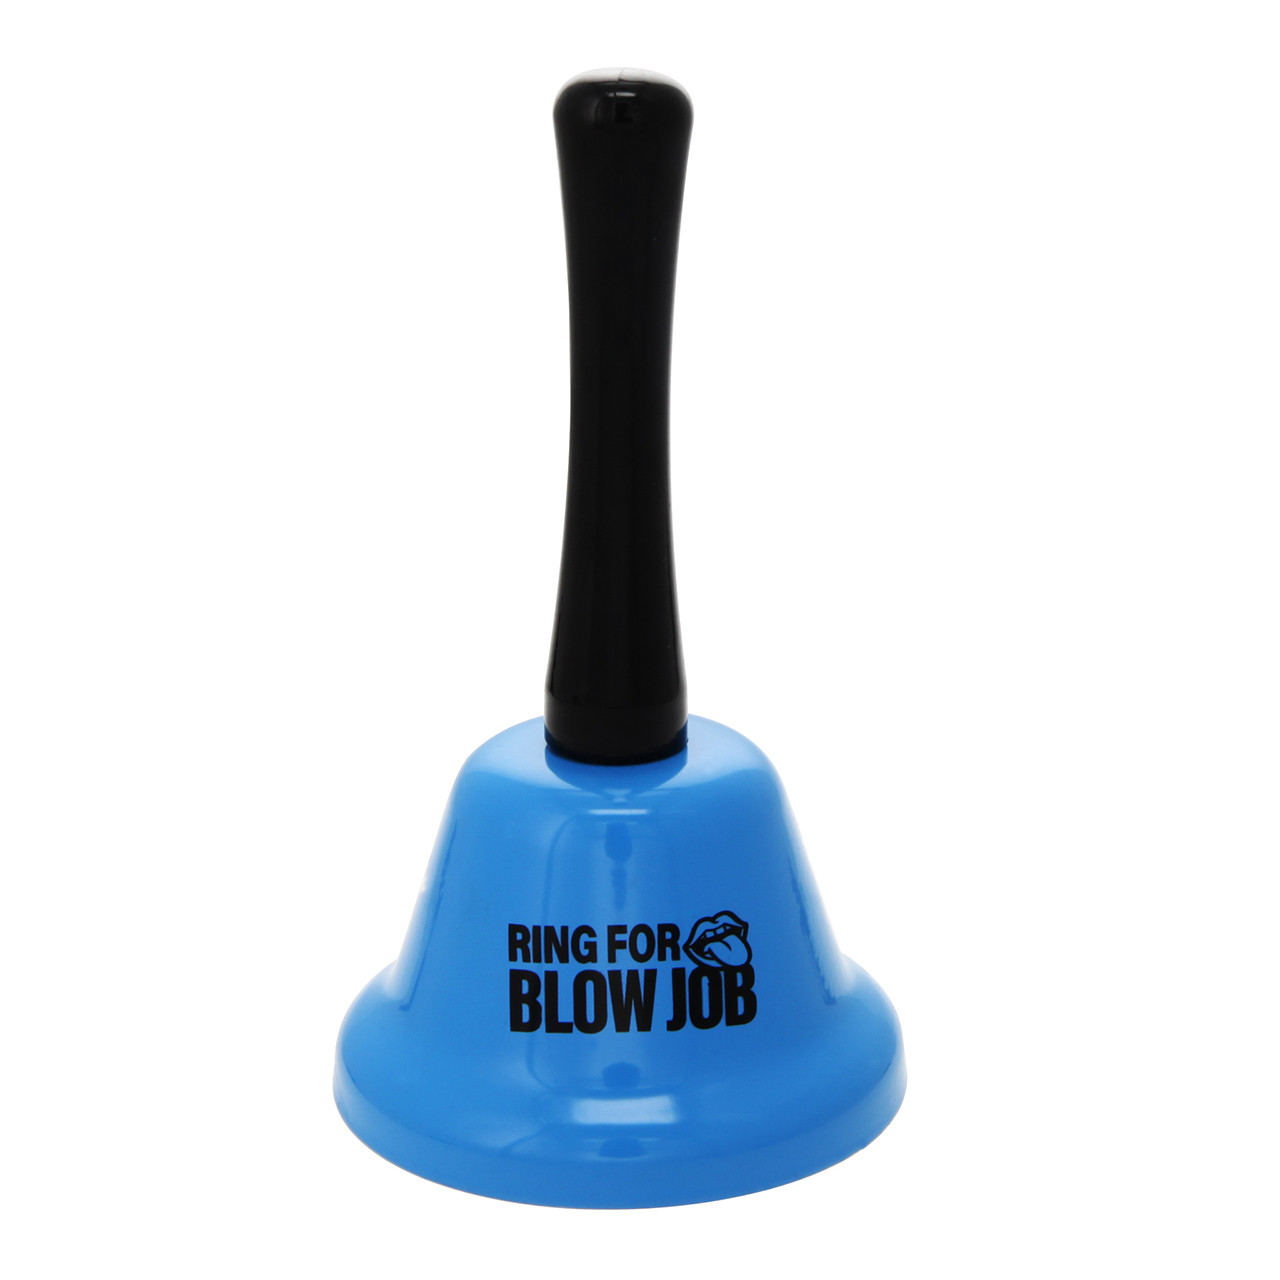 LARGE BELL RING FOR BLOW JOB